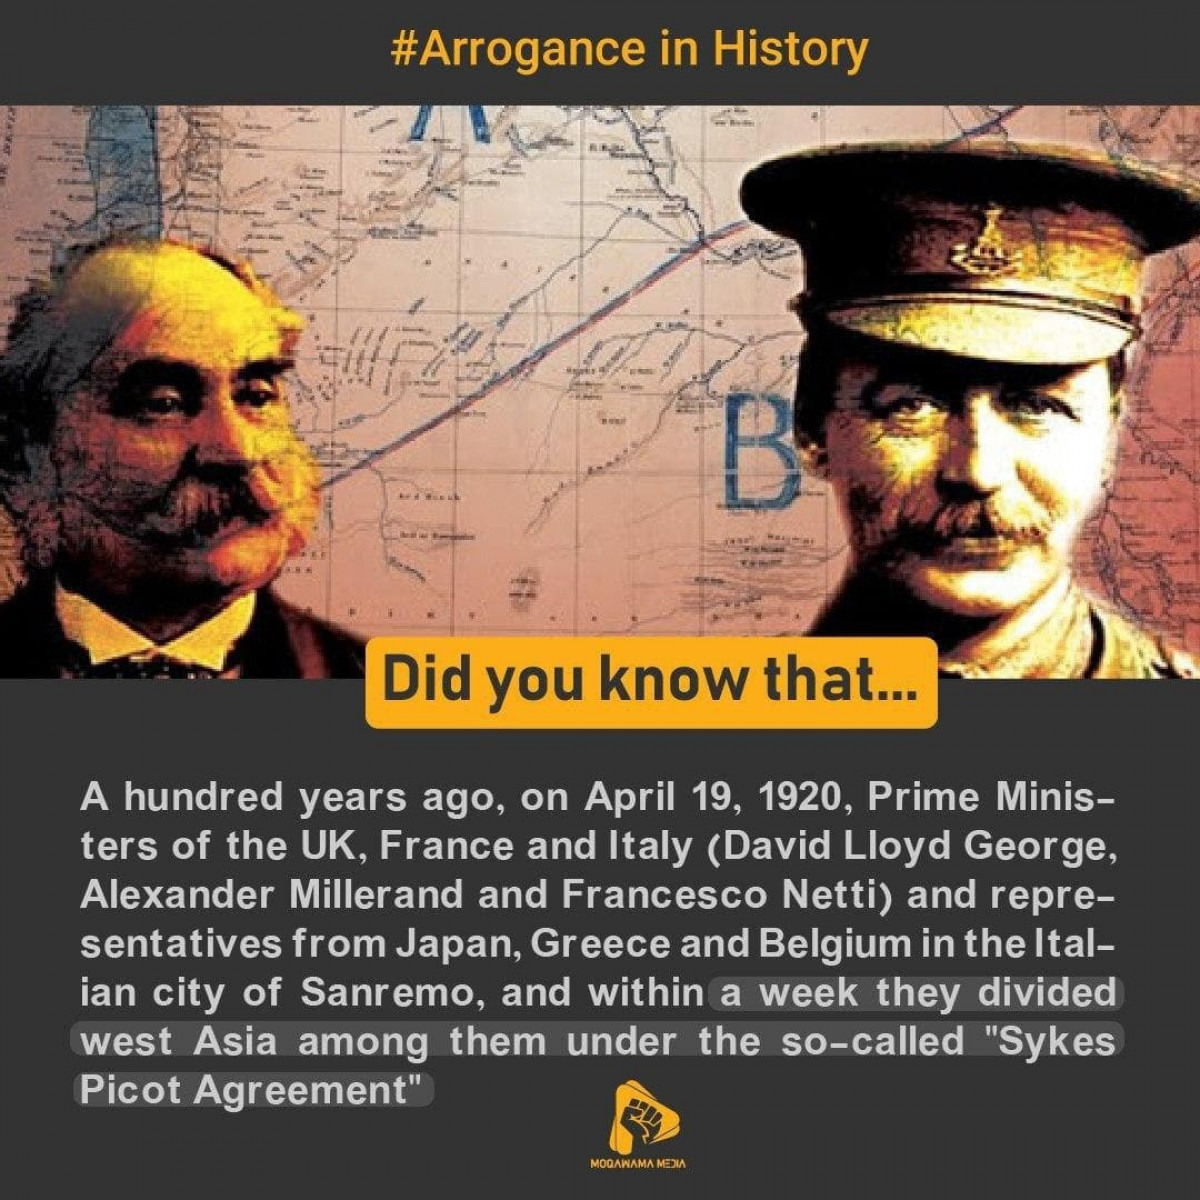 called Sykes Picot Agreement